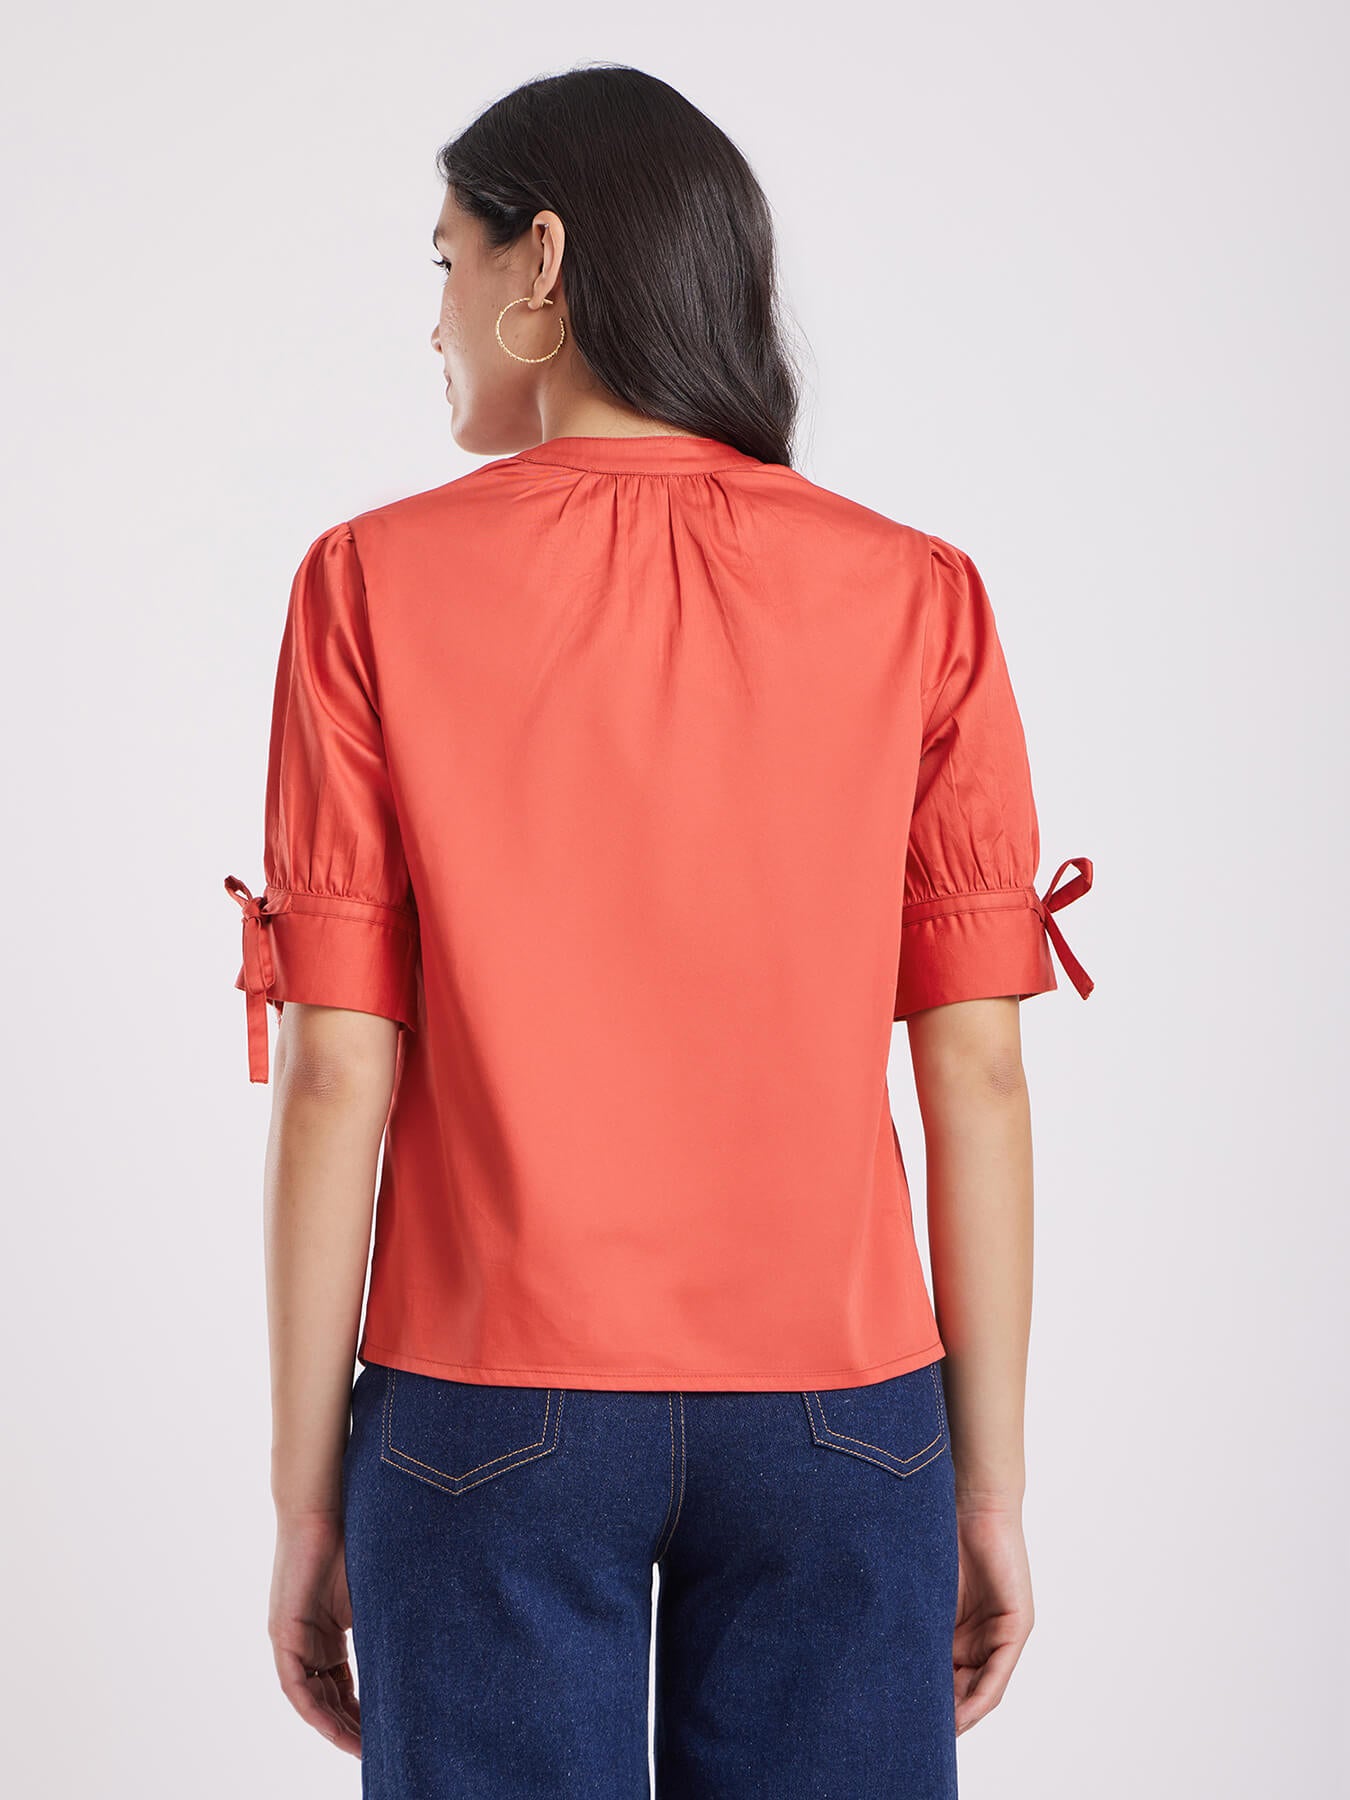 Cotton Tie-Up Sleeve Top - Coral Red